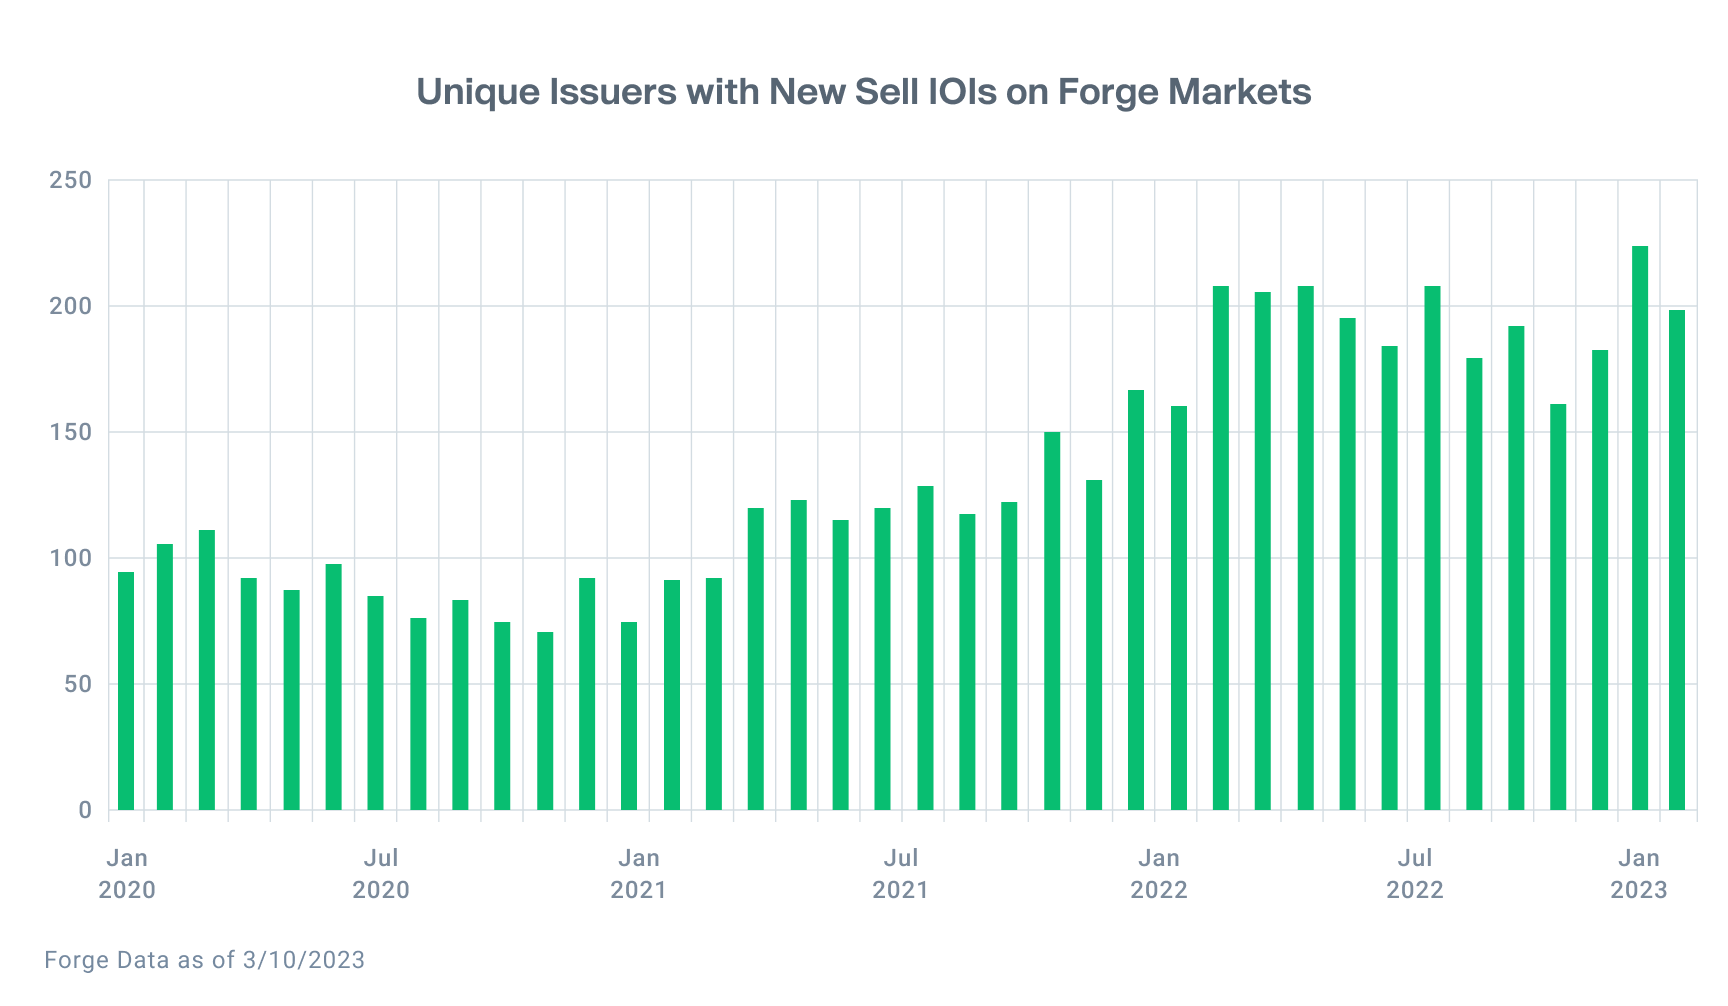 Bar chart shows 191 unique issuers with new sell IOIs for February 2023